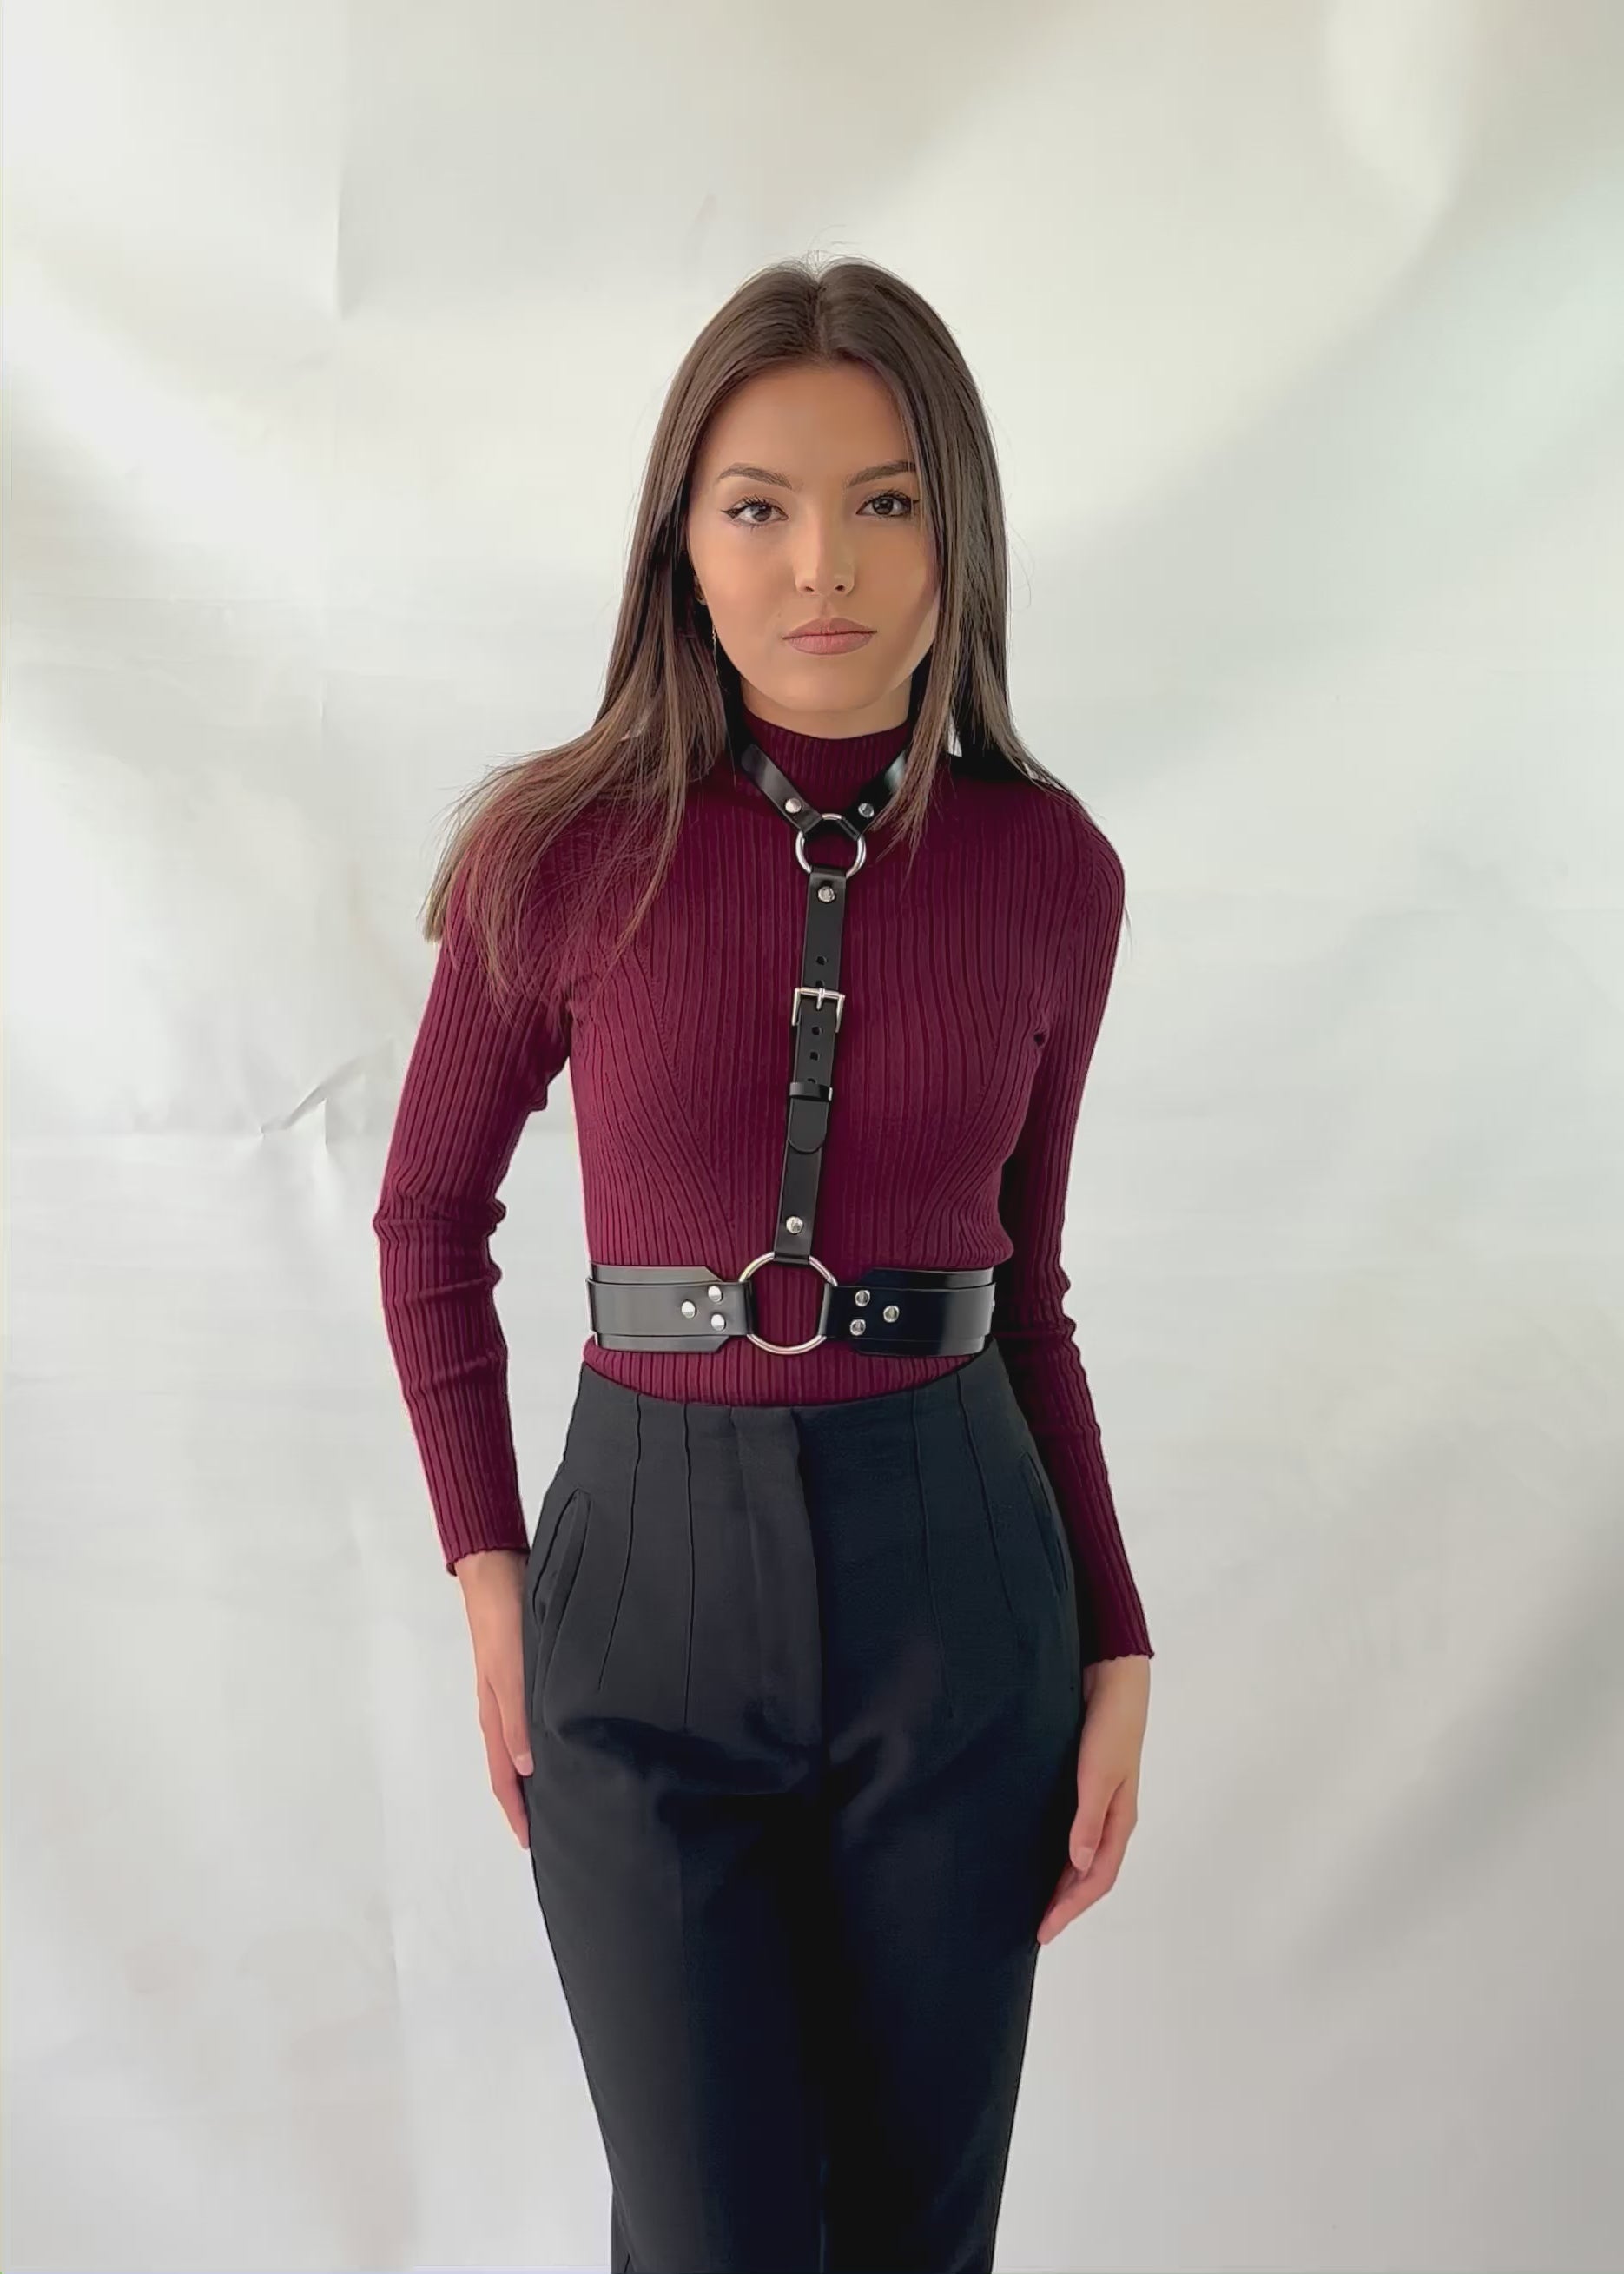 Neck to waist leather harness worn with burgundy turtleneck and black pants in a casual outfit.